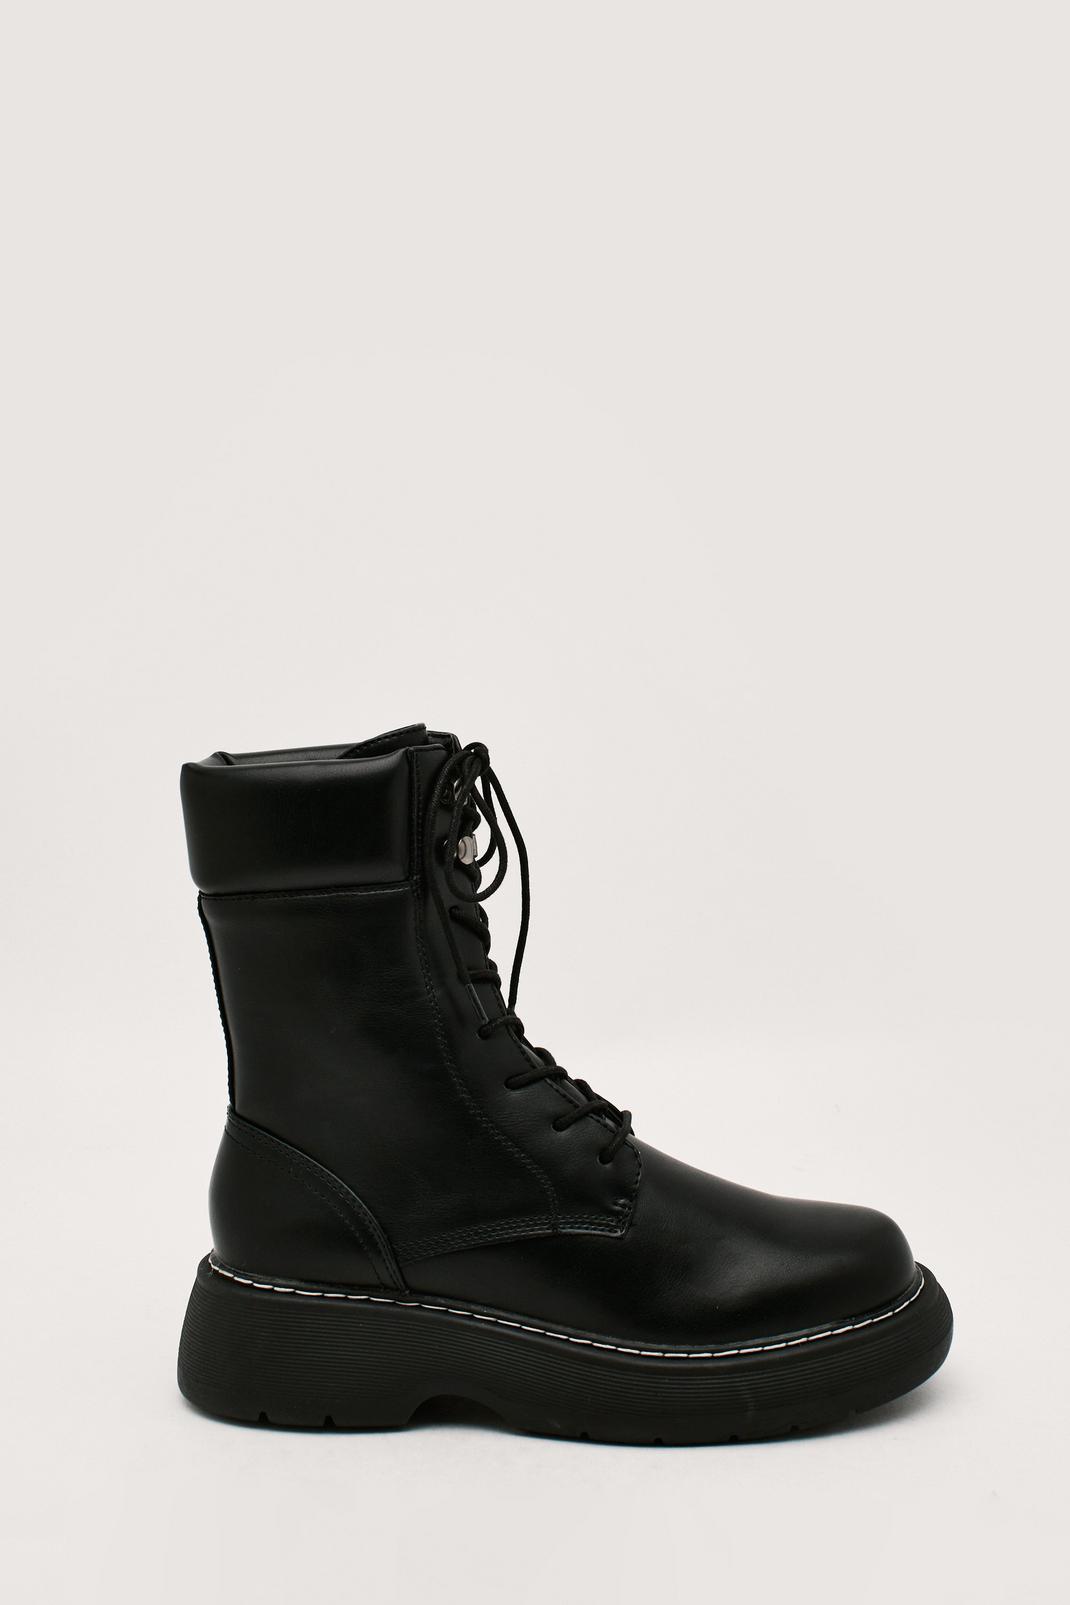 Black Faux Leather High Lace Up Biker Boots image number 1